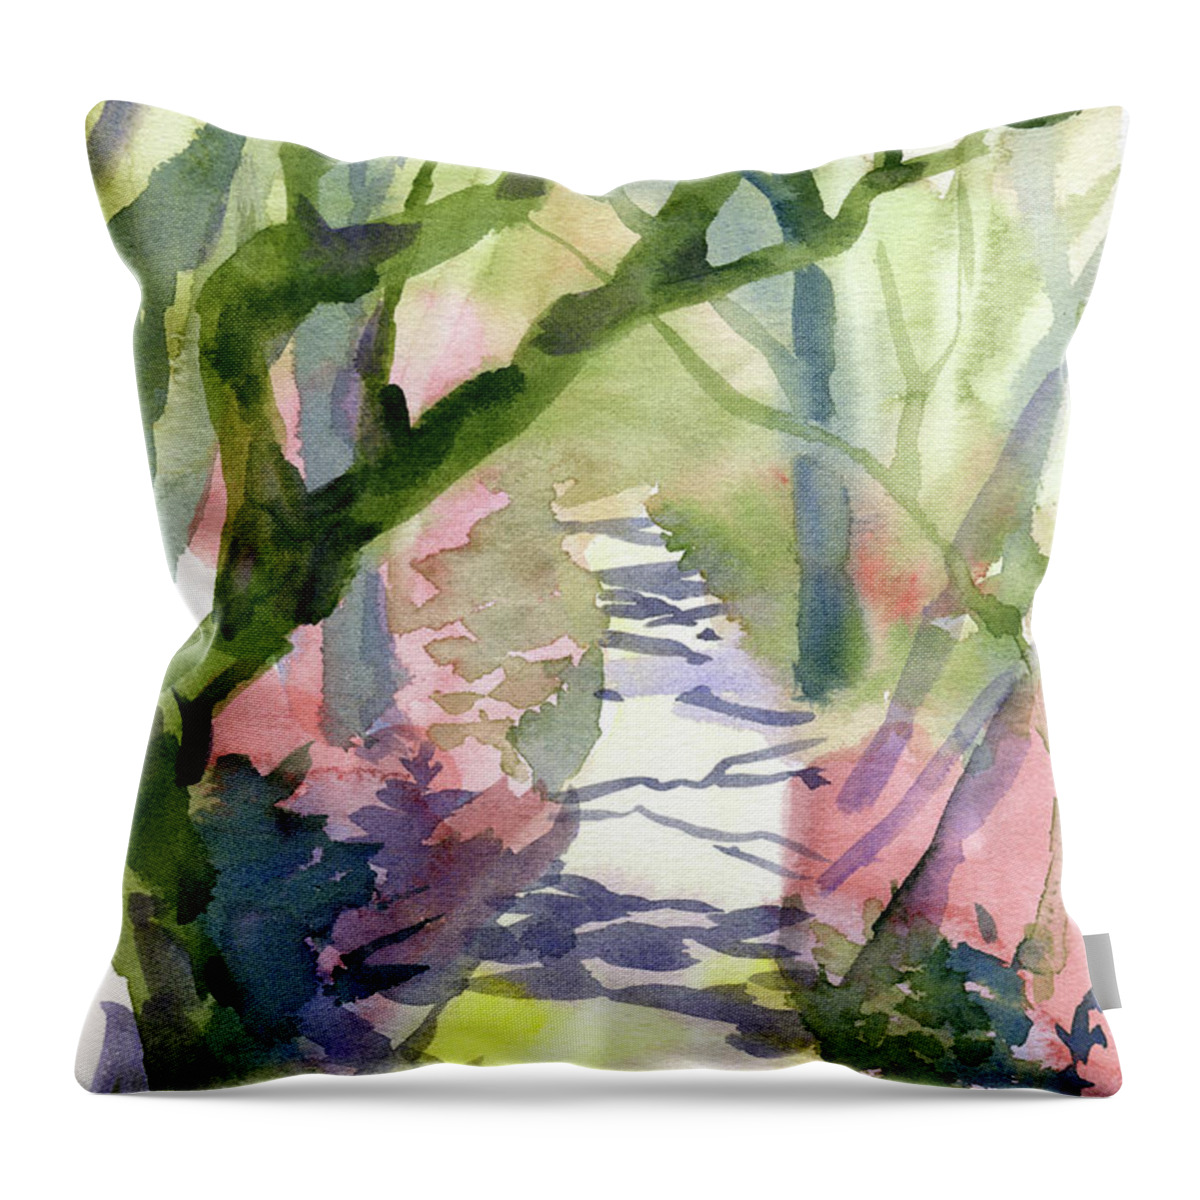 Watercolor Throw Pillow featuring the digital art Watercolor A Single Pathway Painting by Sambel Pedes